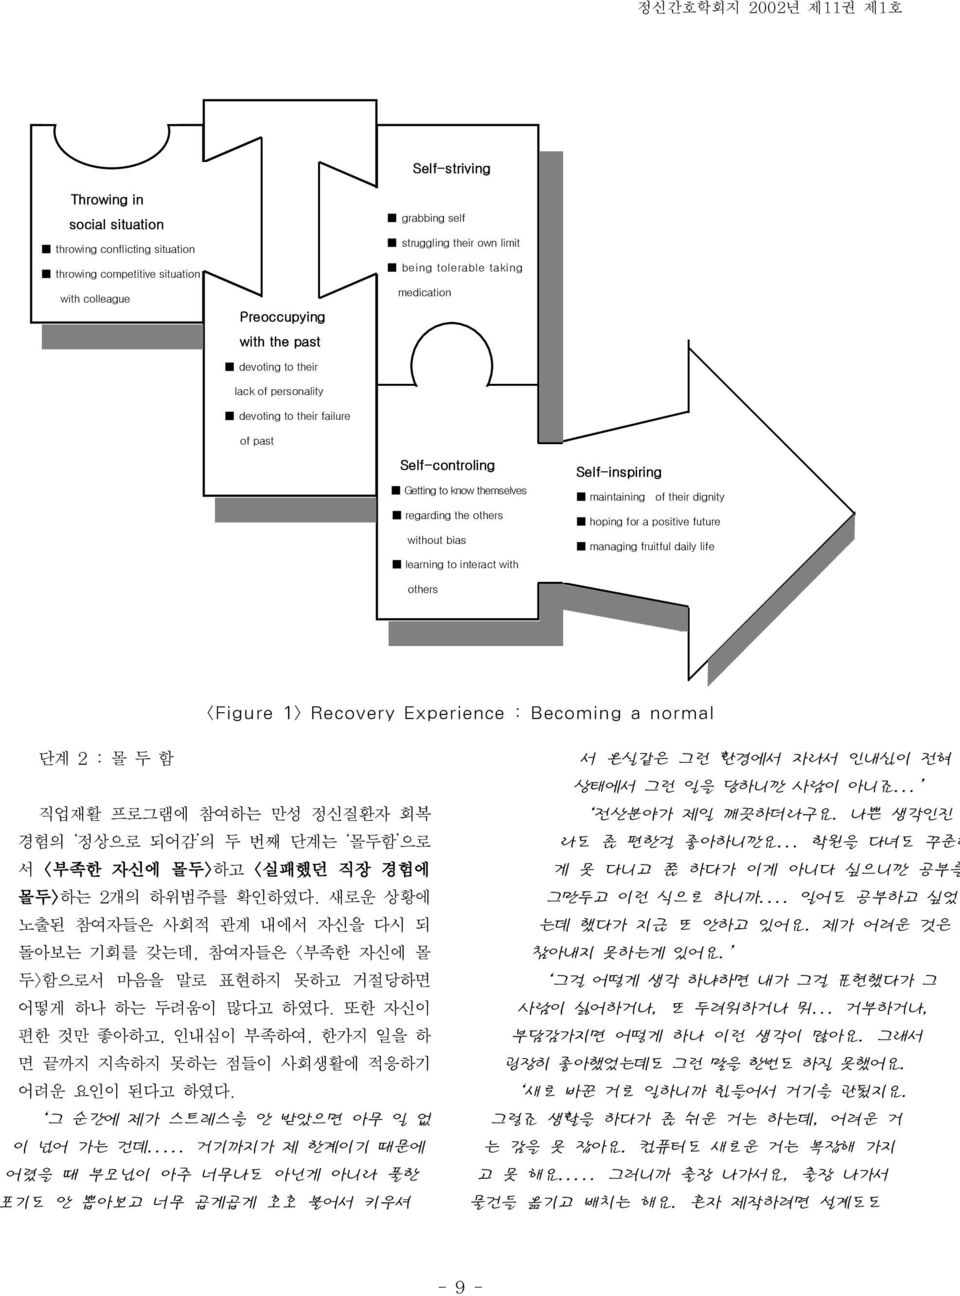 learning to interact with Self-inspiring maintaining of their dignity hoping for a positive future managing fruitful daily life others <Figure 1> Recovery Experience : Becoming a normal 단계 2 : 몰 두 함